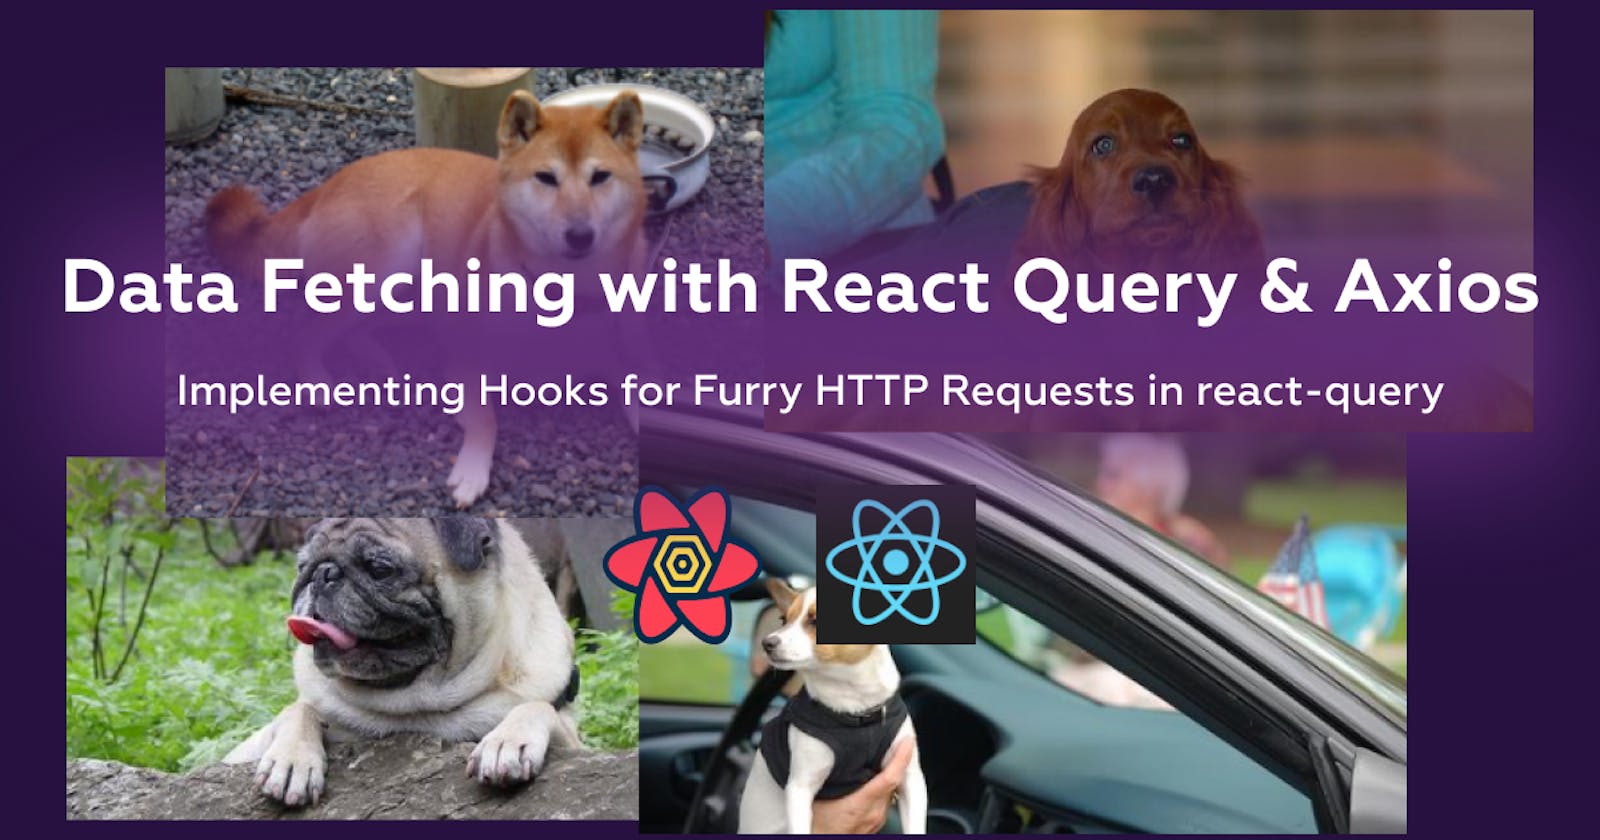 Data Fetching with React Query & Axios